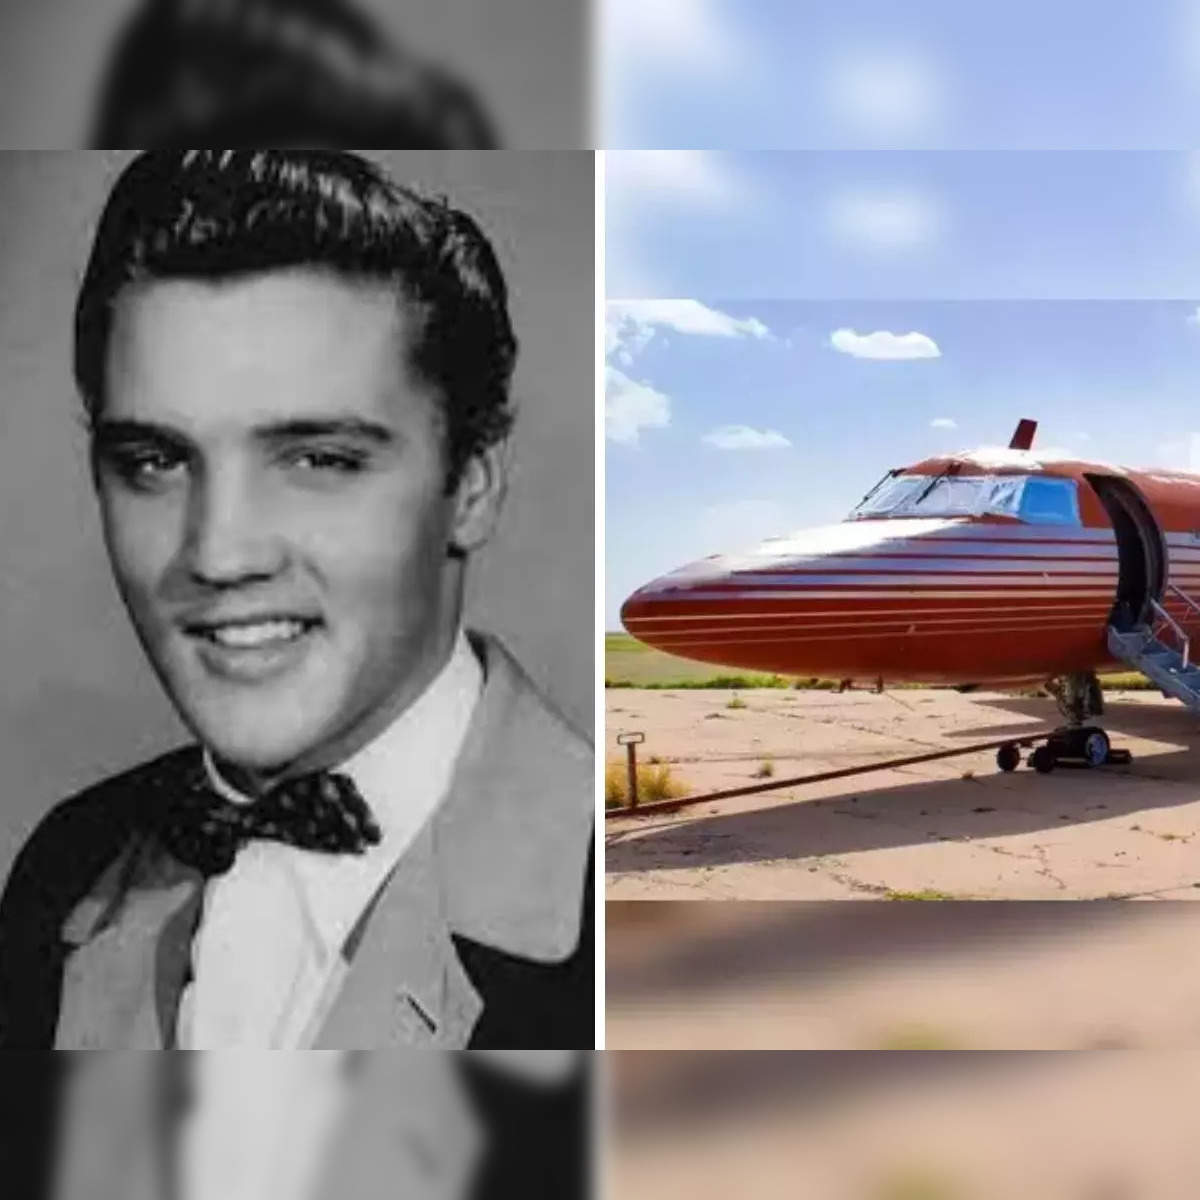 Elvis Presley's soiled underwear fails to sell at auction